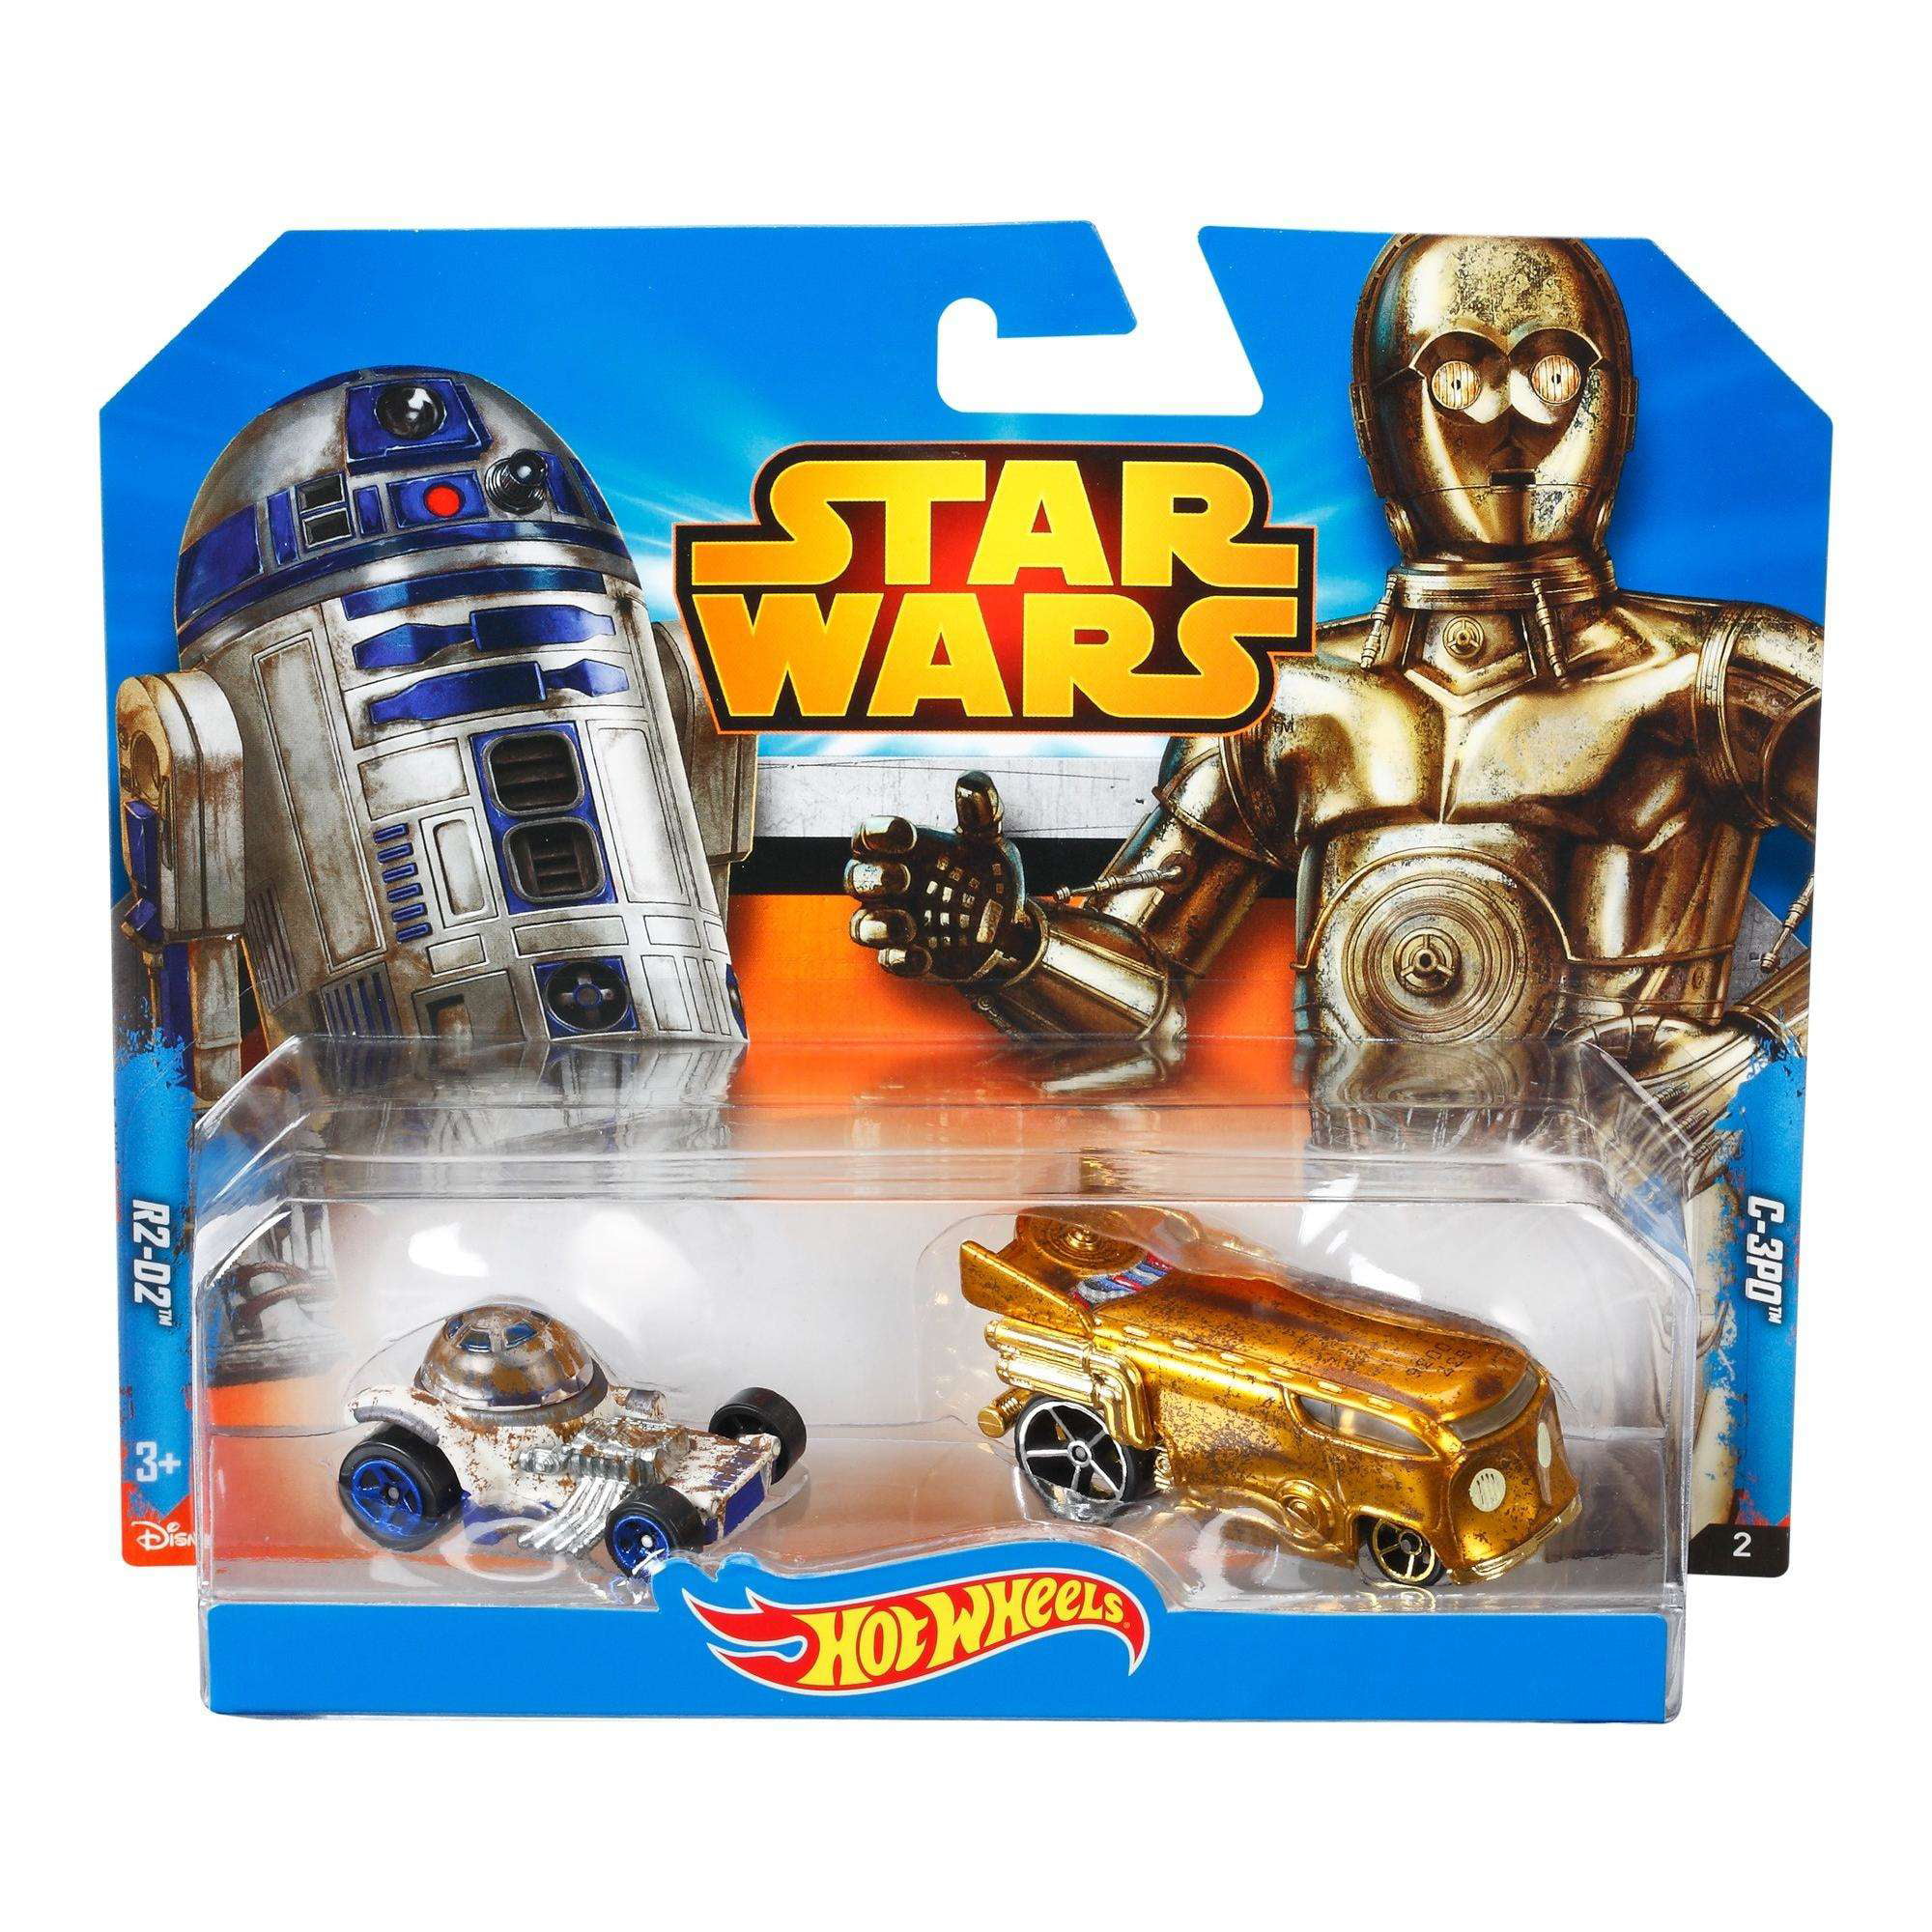 Star Wars Hot Wheels Character Cars 2 Pack C3p0 and R2d2 Boxed for sale online